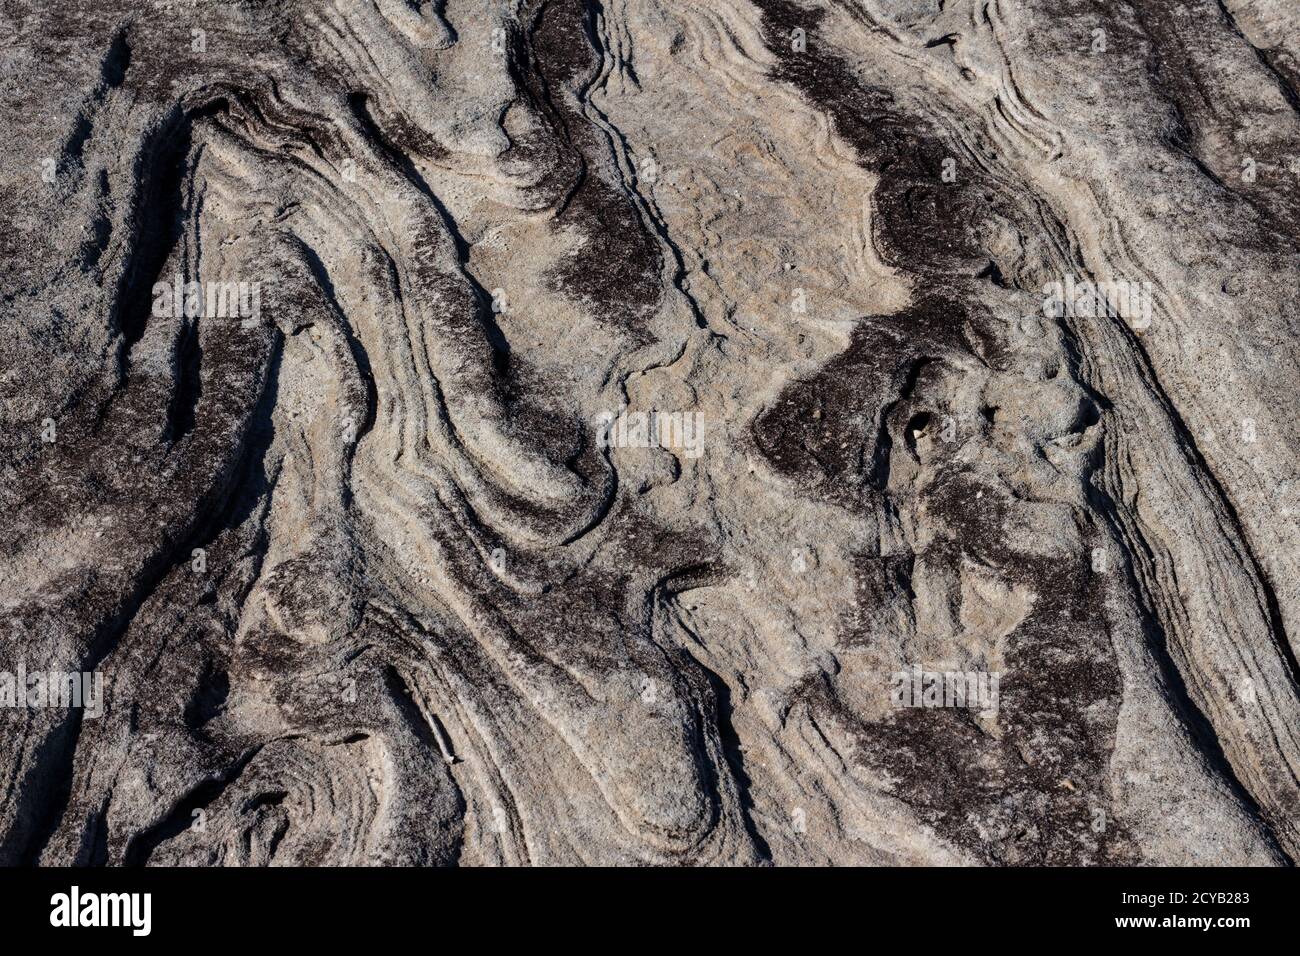 Natural sandstone rock rippled textured surface ideal as background Stock Photo